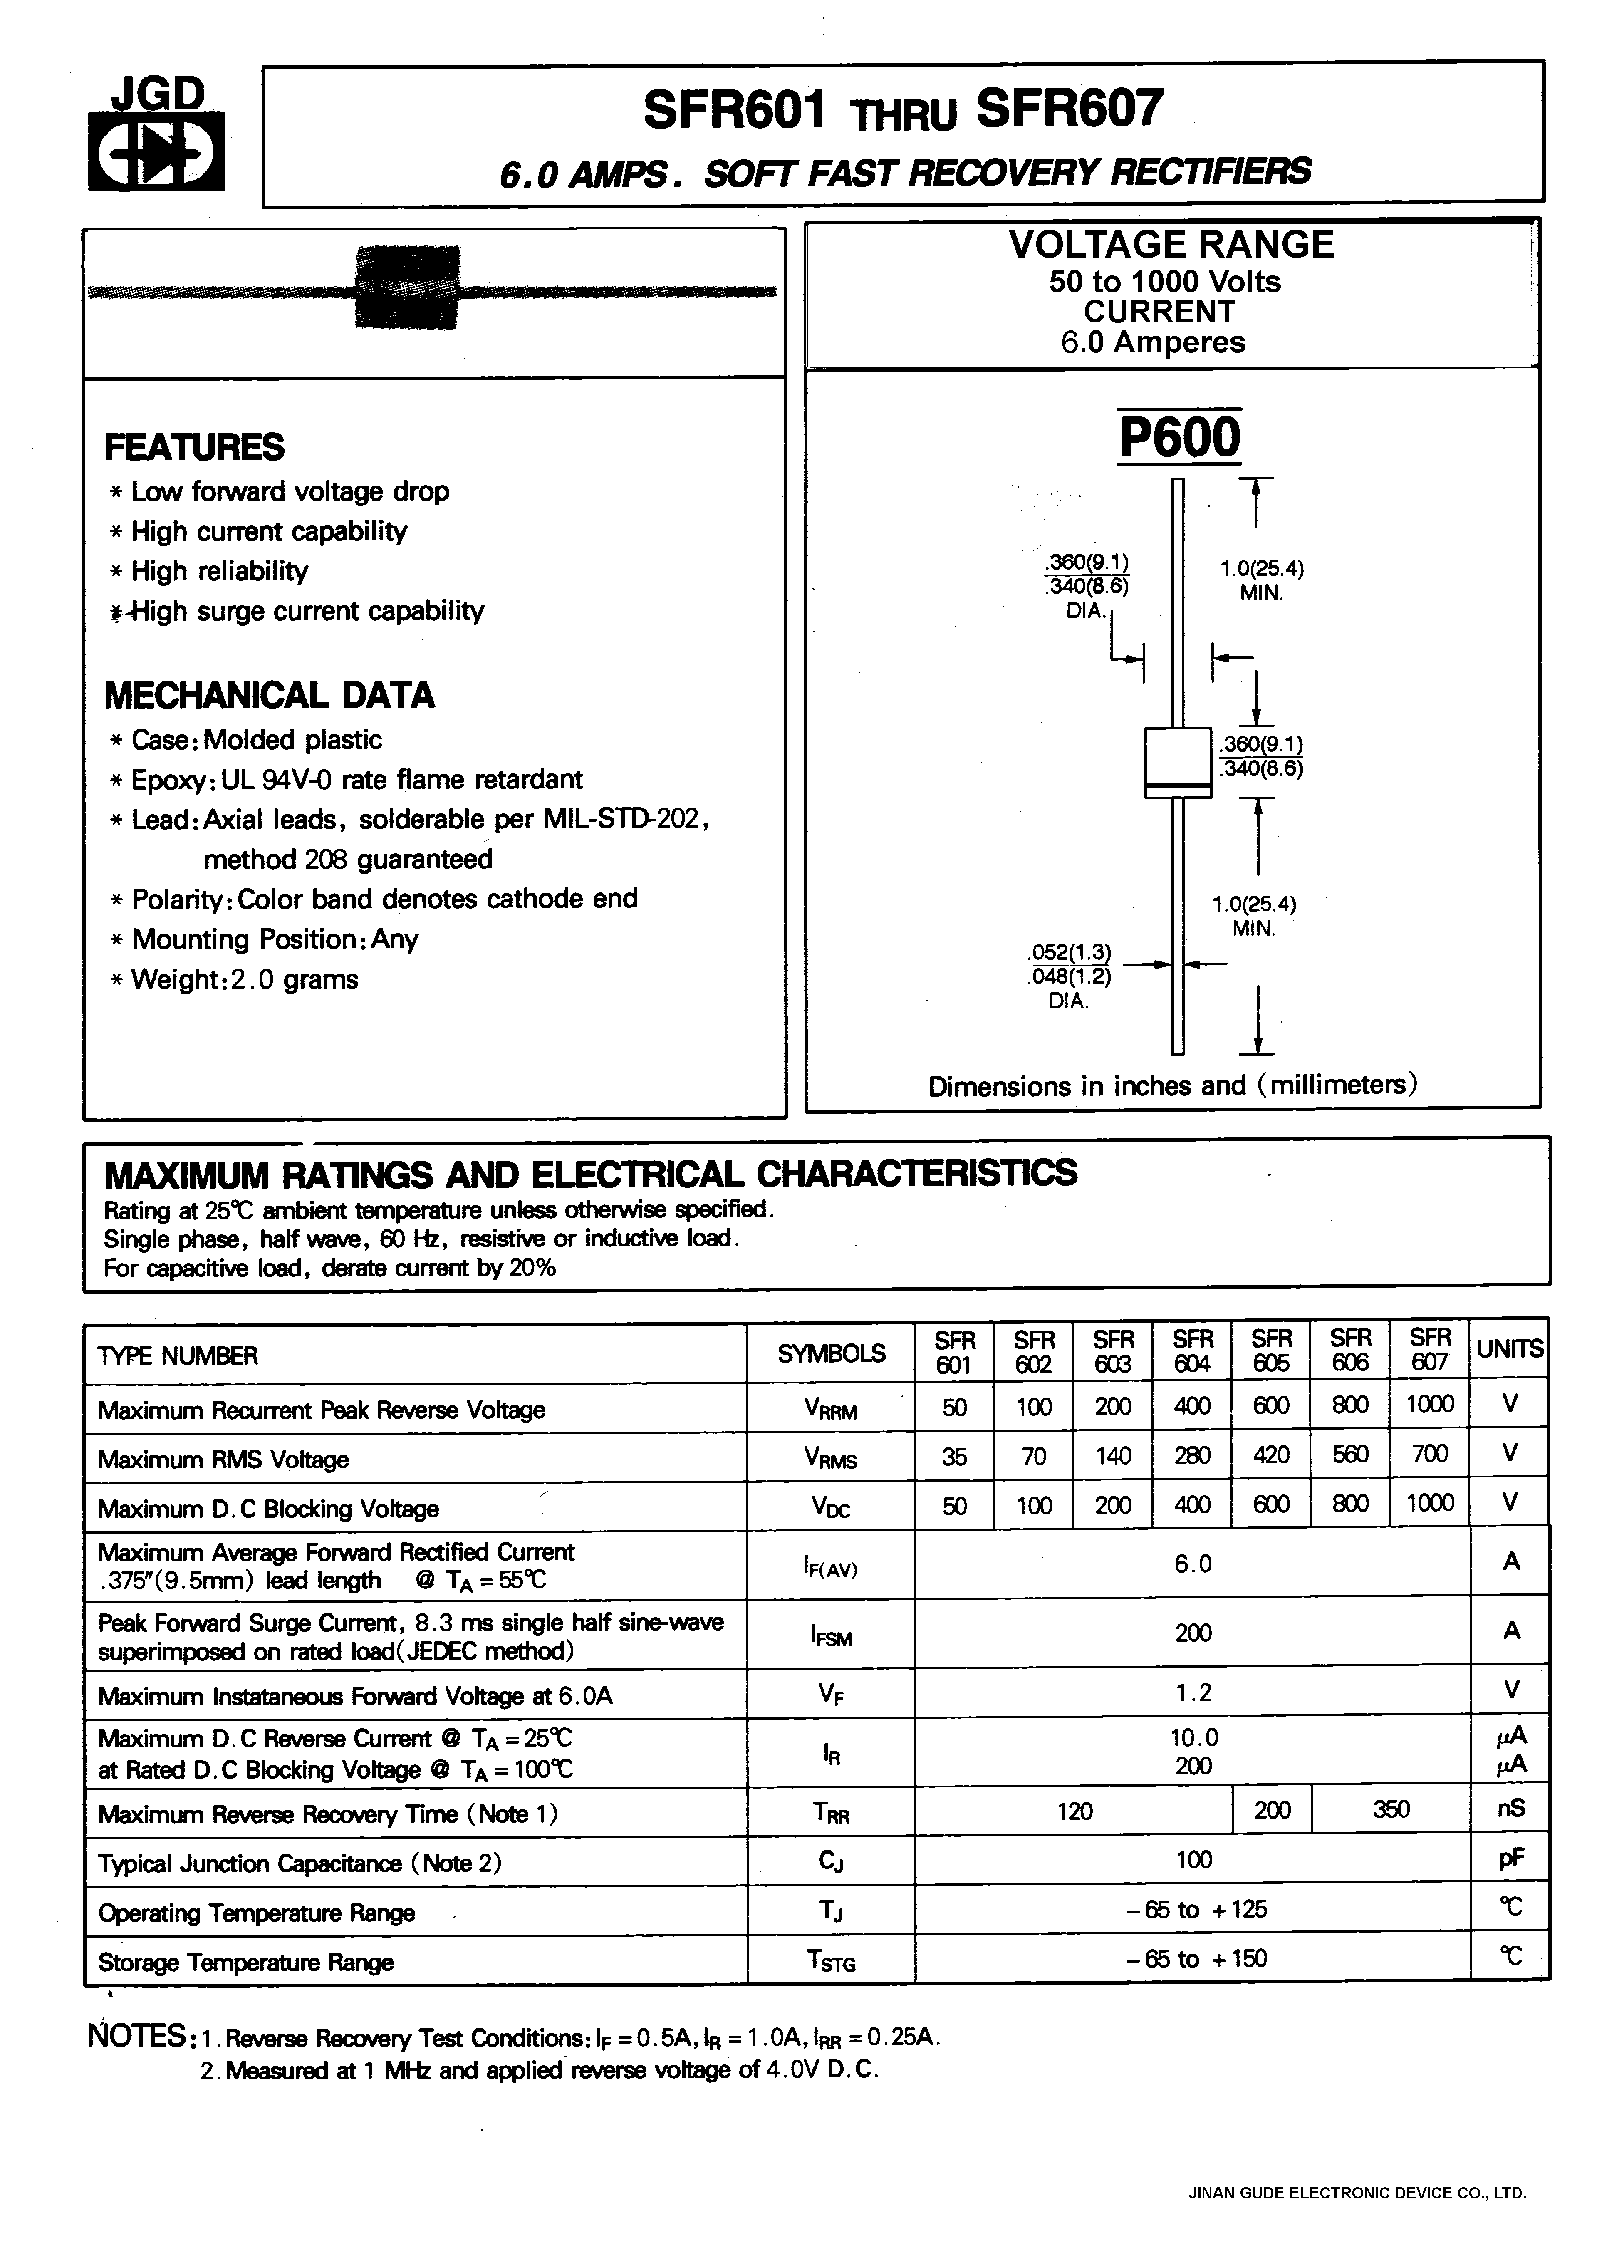 Datasheet SFR602 - 6.0 AMPS. SOFT FAST RECOVERY RECTIFIERS page 1